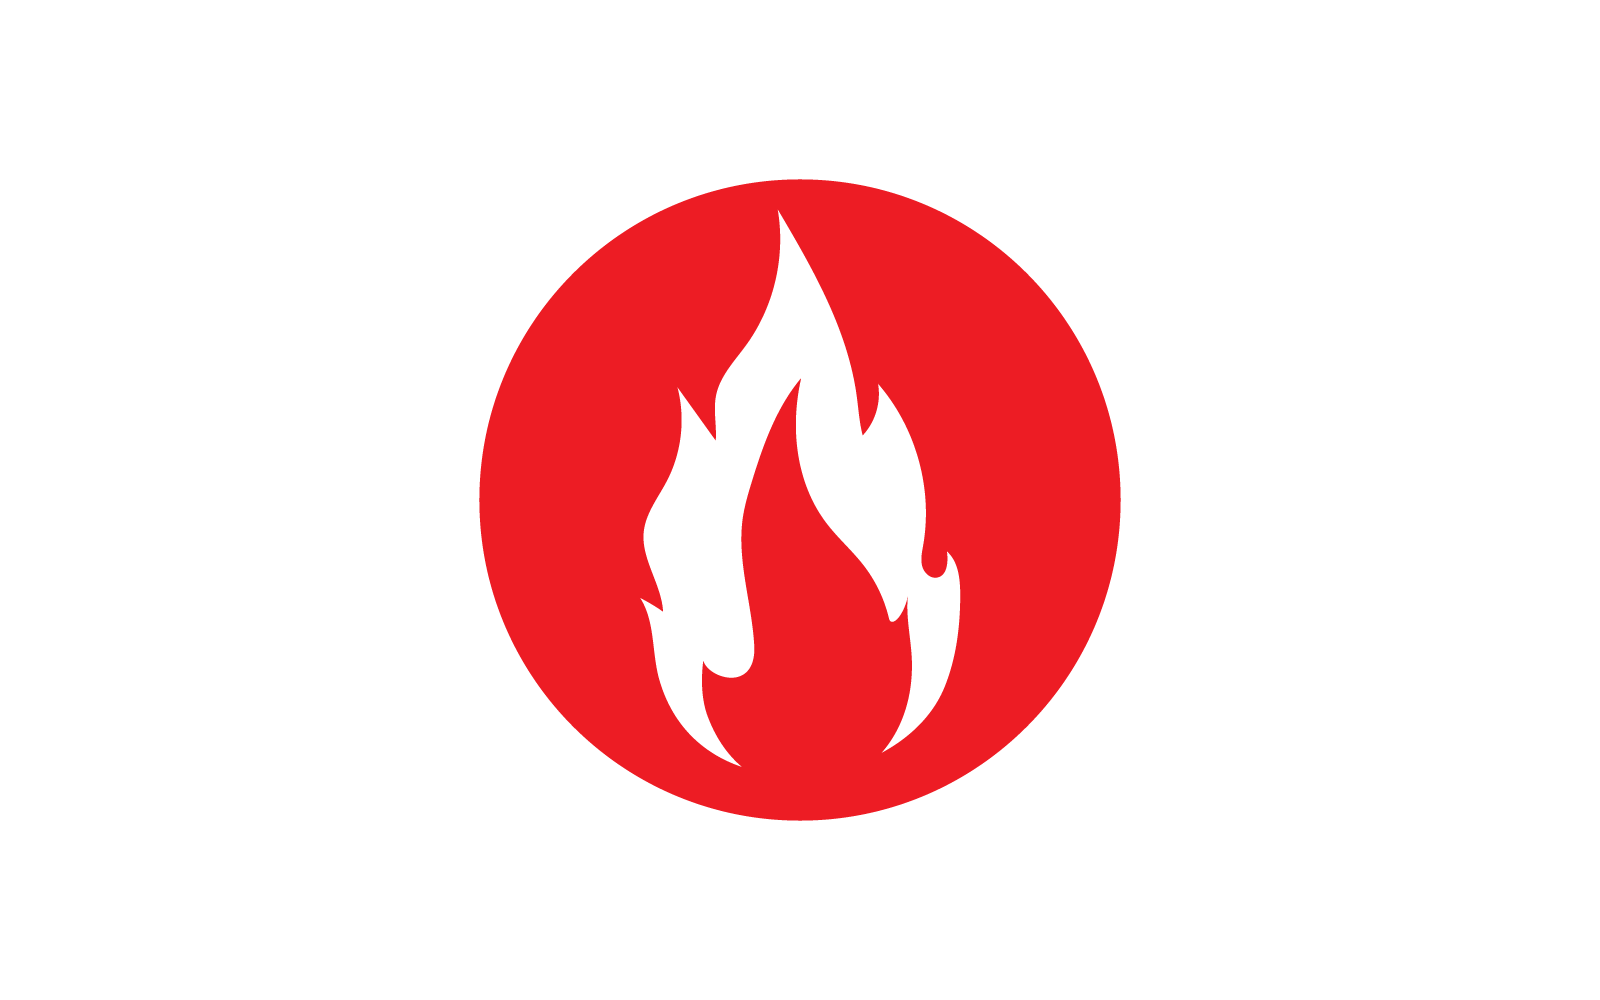 Fire flame, Oil, gas and energy logo flat design logo concept